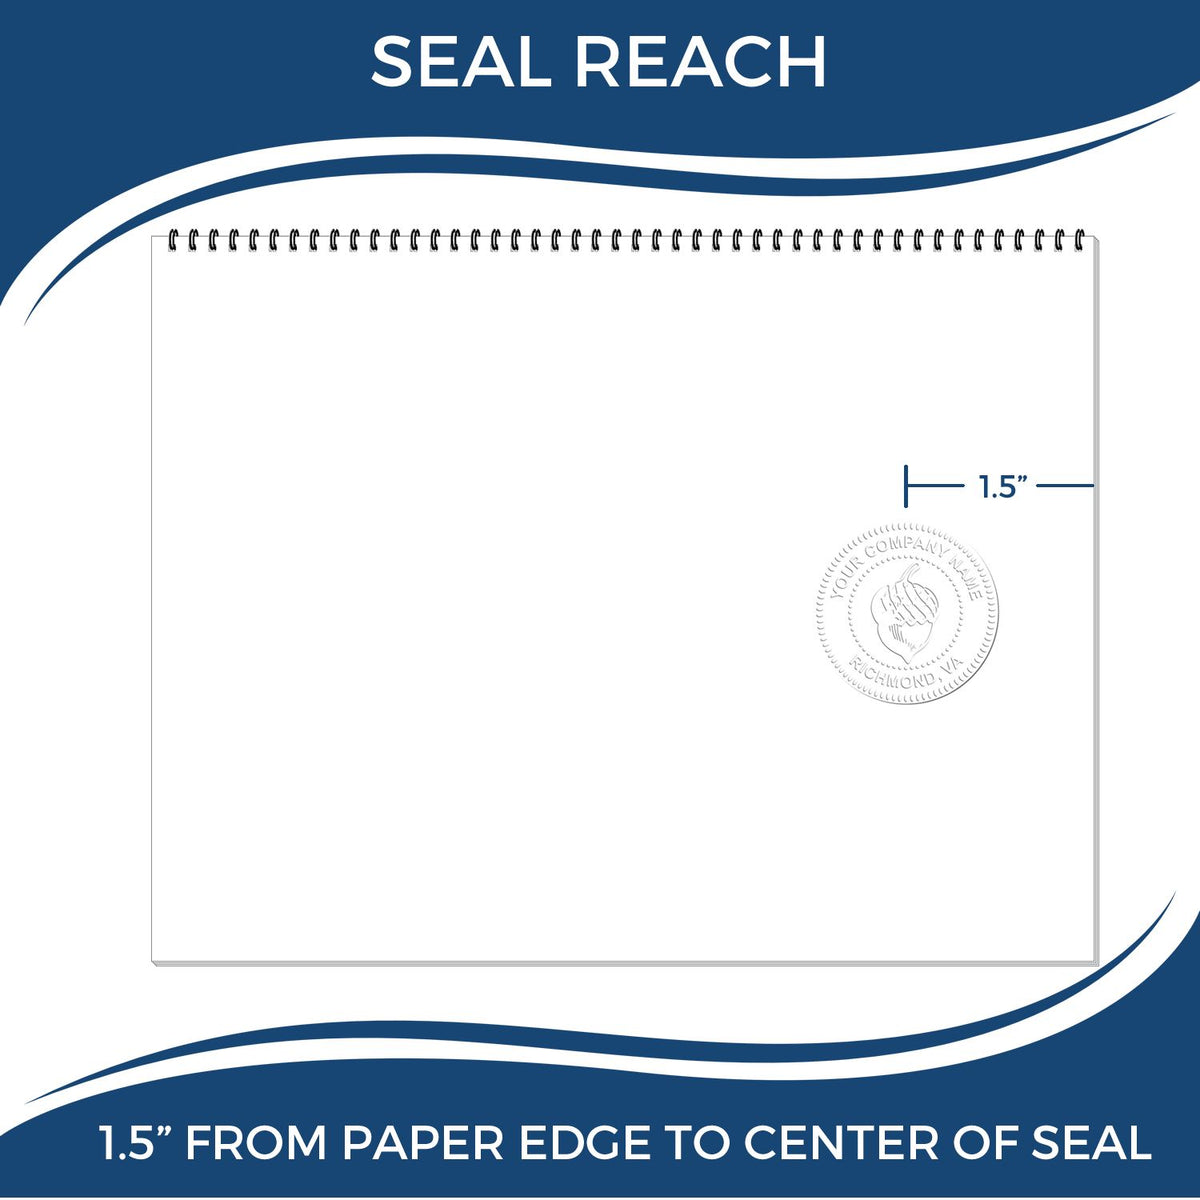 An infographic showing the seal reach which is represented by a ruler and a miniature seal image of the Kentucky Desk Surveyor Seal Embosser